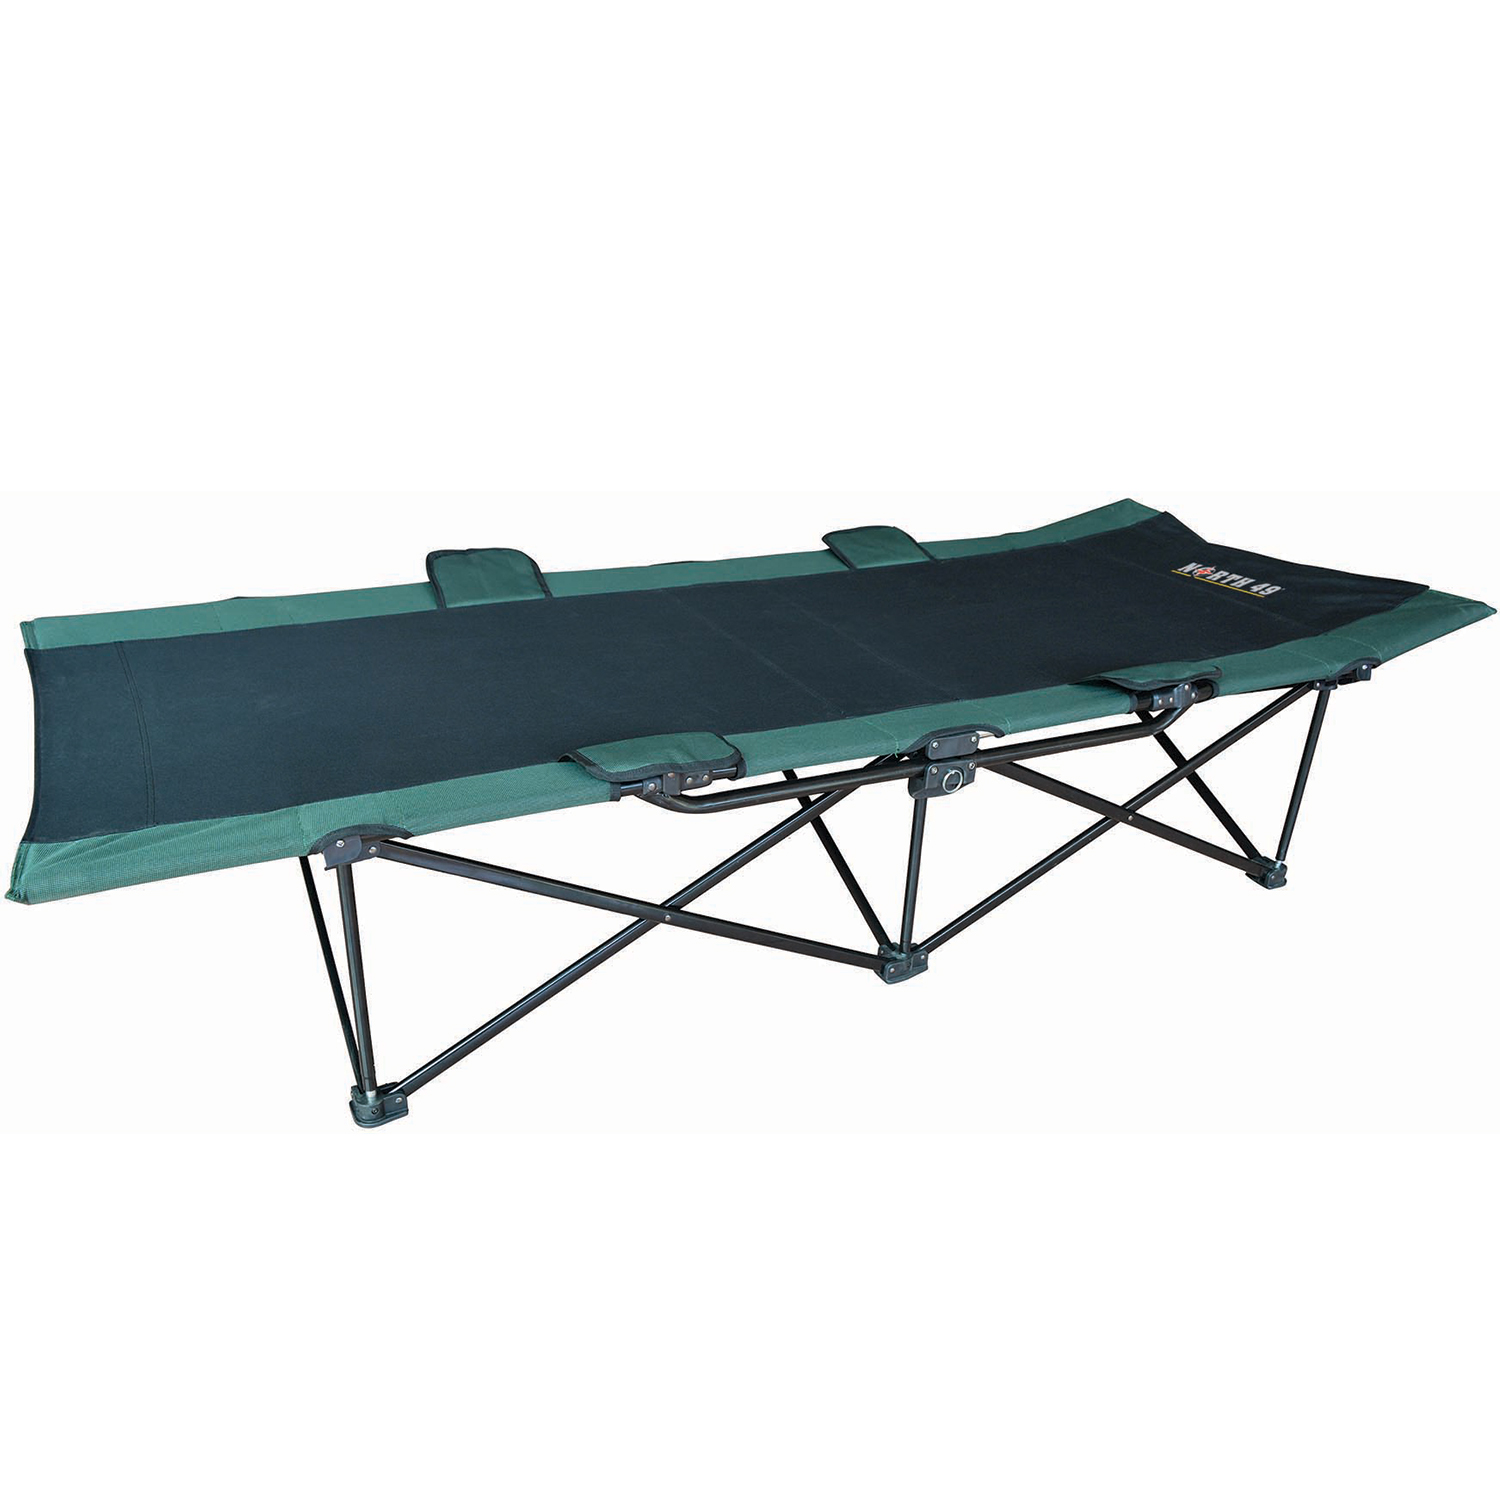 World Famous - North 49, Strongman 500 easy steel cot